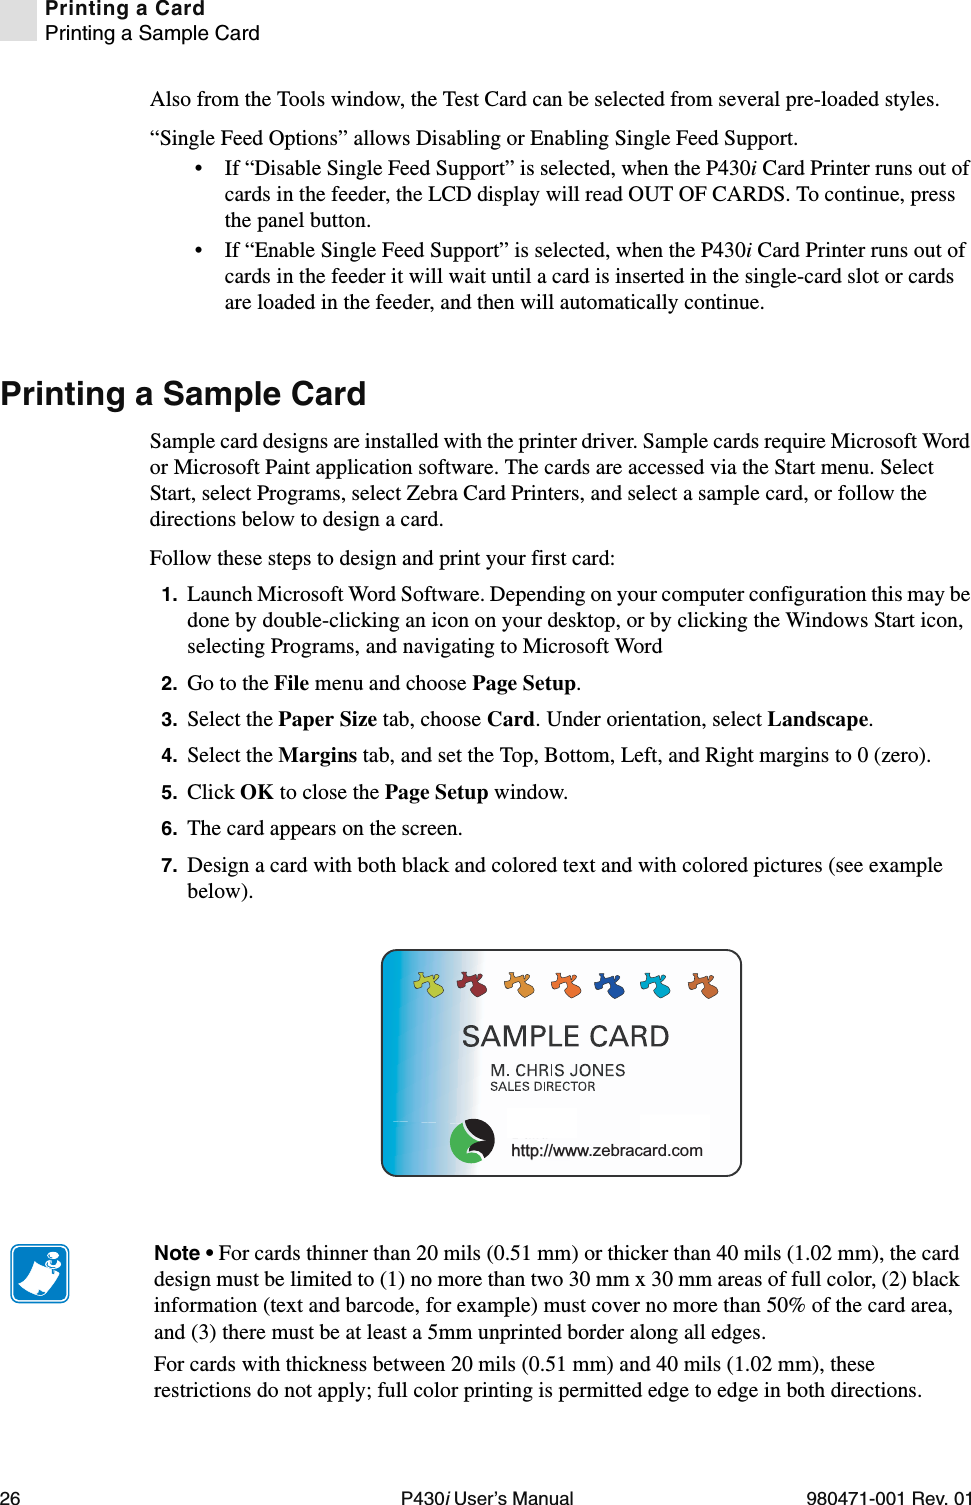 26 P430i User’s Manual 980471-001 Rev. 01Printing a CardPrinting a Sample CardAlso from the Tools window, the Test Card can be selected from several pre-loaded styles.“Single Feed Options” allows Disabling or Enabling Single Feed Support.• If “Disable Single Feed Support” is selected, when the P430i Card Printer runs out of cards in the feeder, the LCD display will read OUT OF CARDS. To continue, press the panel button.• If “Enable Single Feed Support” is selected, when the P430i Card Printer runs out of cards in the feeder it will wait until a card is inserted in the single-card slot or cards are loaded in the feeder, and then will automatically continue.Printing a Sample CardSample card designs are installed with the printer driver. Sample cards require Microsoft Word or Microsoft Paint application software. The cards are accessed via the Start menu. Select Start, select Programs, select Zebra Card Printers, and select a sample card, or follow the directions below to design a card.Follow these steps to design and print your first card:1. Launch Microsoft Word Software. Depending on your computer configuration this may be done by double-clicking an icon on your desktop, or by clicking the Windows Start icon, selecting Programs, and navigating to Microsoft Word2. Go to the File menu and choose Page Setup.3. Select the Paper Size tab, choose Card. Under orientation, select Landscape.4. Select the Margins tab, and set the Top, Bottom, Left, and Right margins to 0 (zero).5. Click OK to close the Page Setup window.6. The card appears on the screen.7. Design a card with both black and colored text and with colored pictures (see example below).us!http://www.zebracard.comNote • For cards thinner than 20 mils (0.51 mm) or thicker than 40 mils (1.02 mm), the card design must be limited to (1) no more than two 30 mm x 30 mm areas of full color, (2) black information (text and barcode, for example) must cover no more than 50% of the card area, and (3) there must be at least a 5mm unprinted border along all edges.For cards with thickness between 20 mils (0.51 mm) and 40 mils (1.02 mm), these restrictions do not apply; full color printing is permitted edge to edge in both directions.